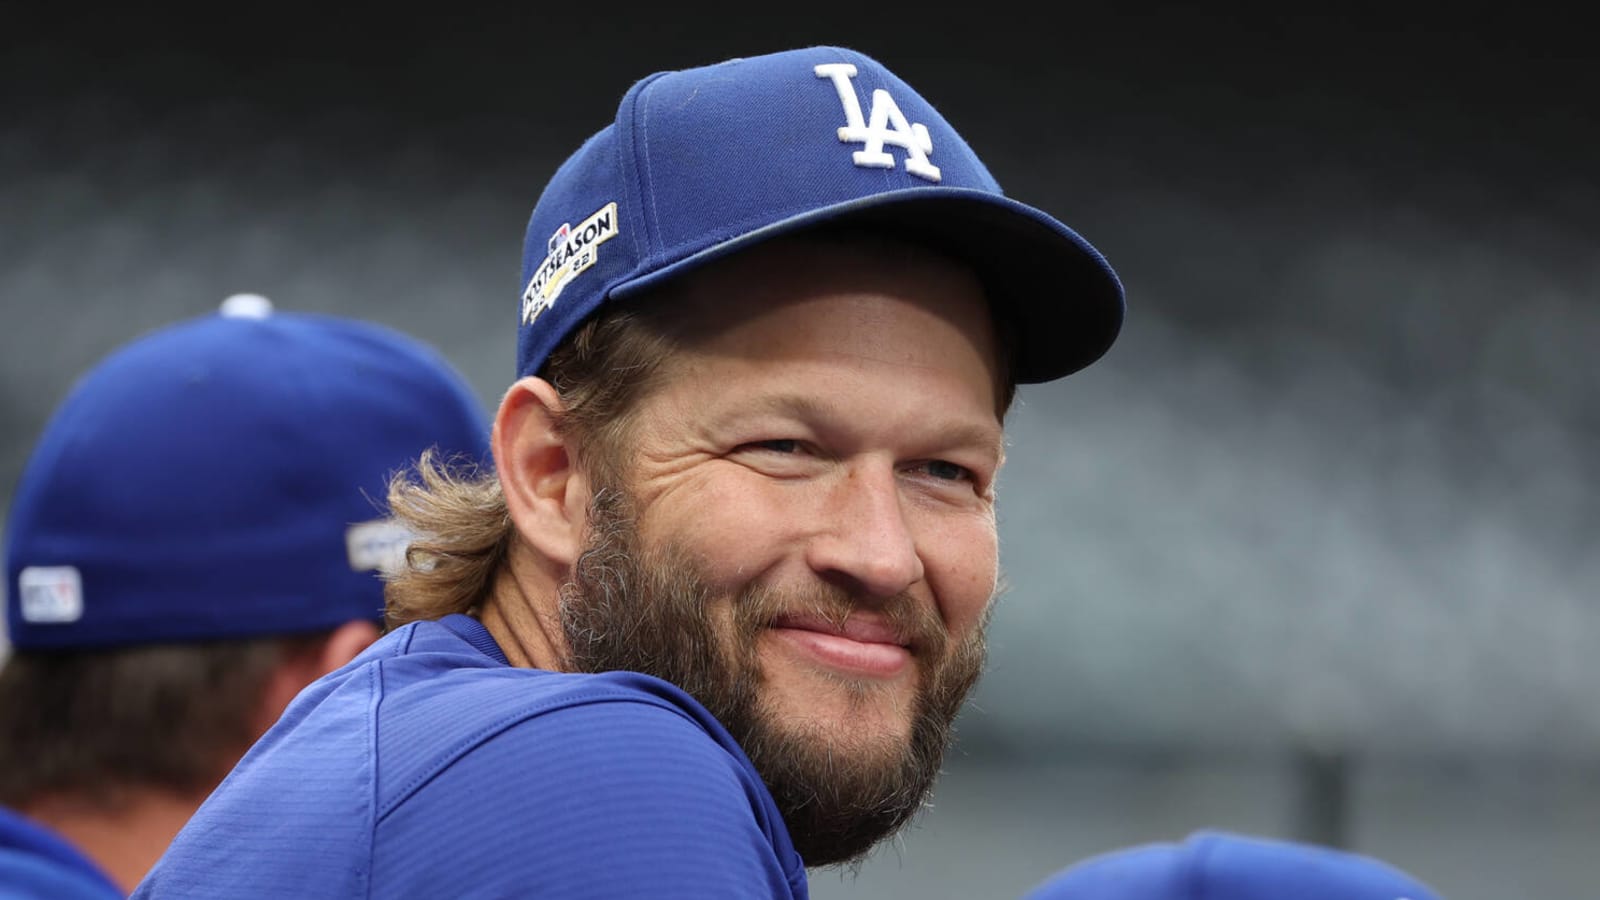 Clayton Kershaw spreads holiday cheer to Dodgers fans with new deal